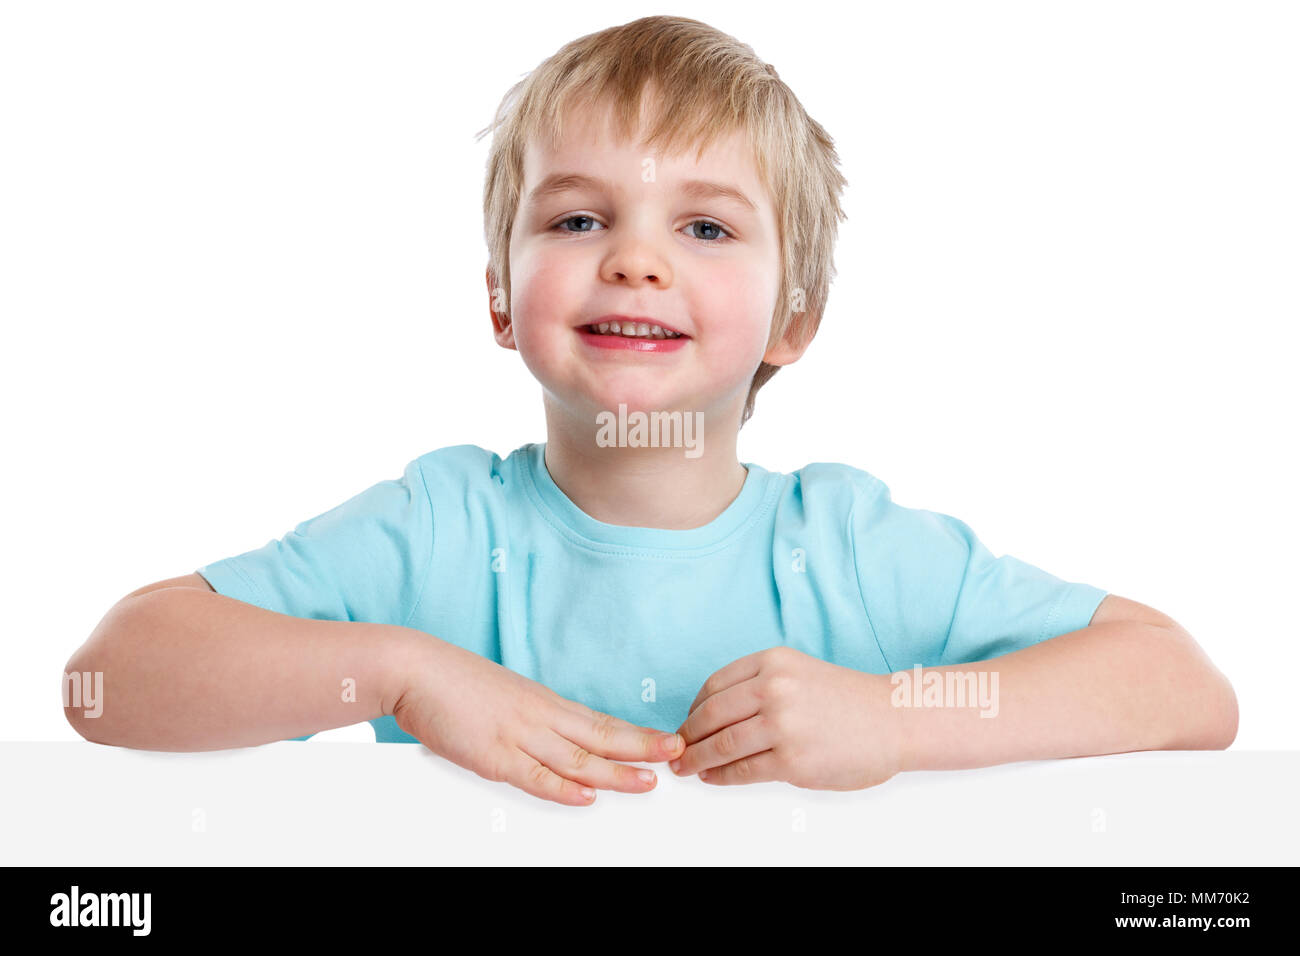 Child kid smiling young little boy copyspace marketing empty blank sign isolated on a white background Stock Photo